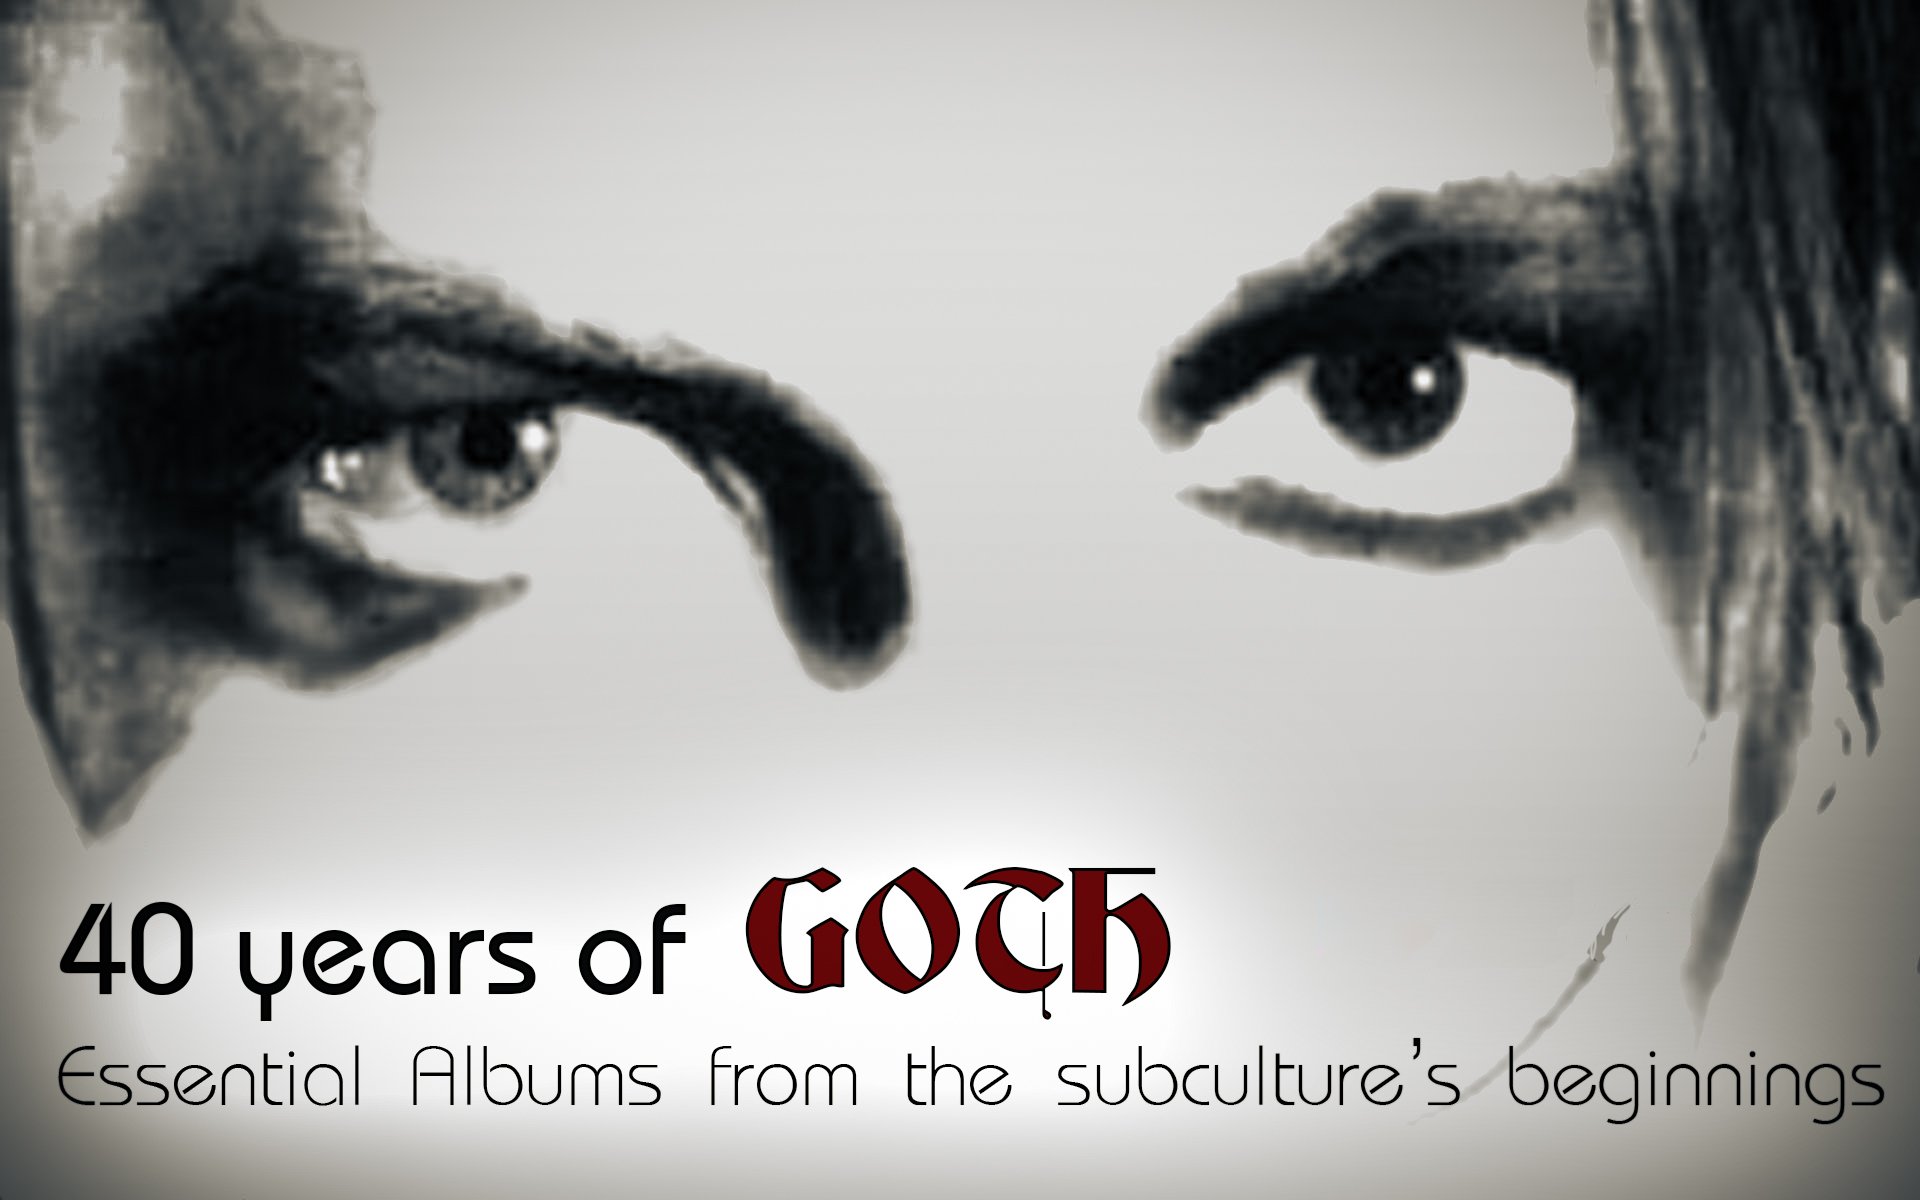 Sleeping Goth Porn - 40 Years of Goth: Essential Albums from the Subculture's Beginnings â€”  Post-Punk.com